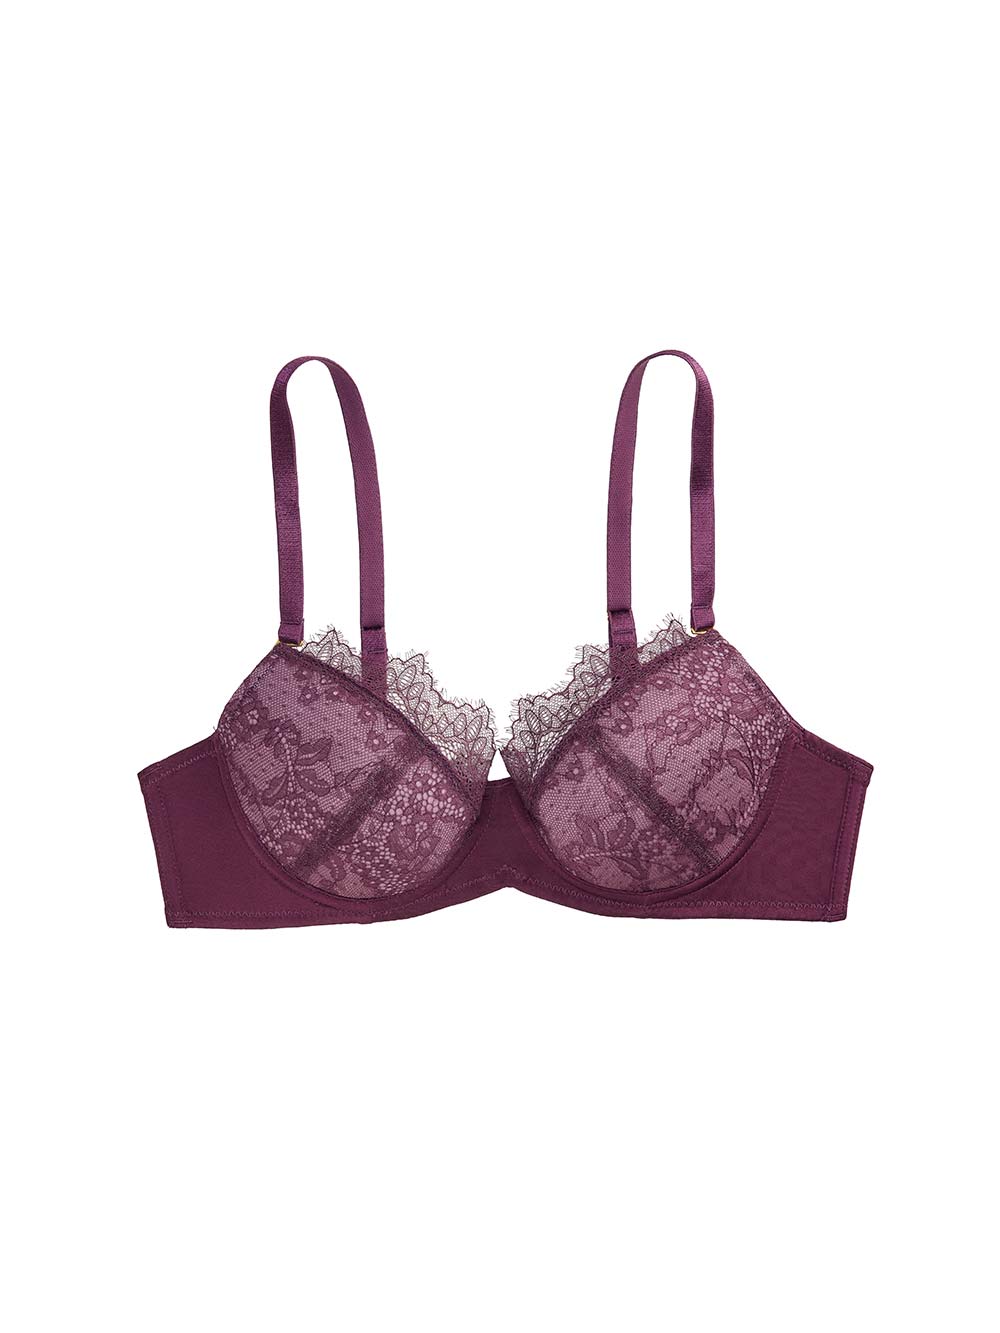 Bra Making - Moulded Cups (L919) - ROCOCO RED (C4004) - Plunge Style, small  boost, no flange, per pair SIZE OPTIONS